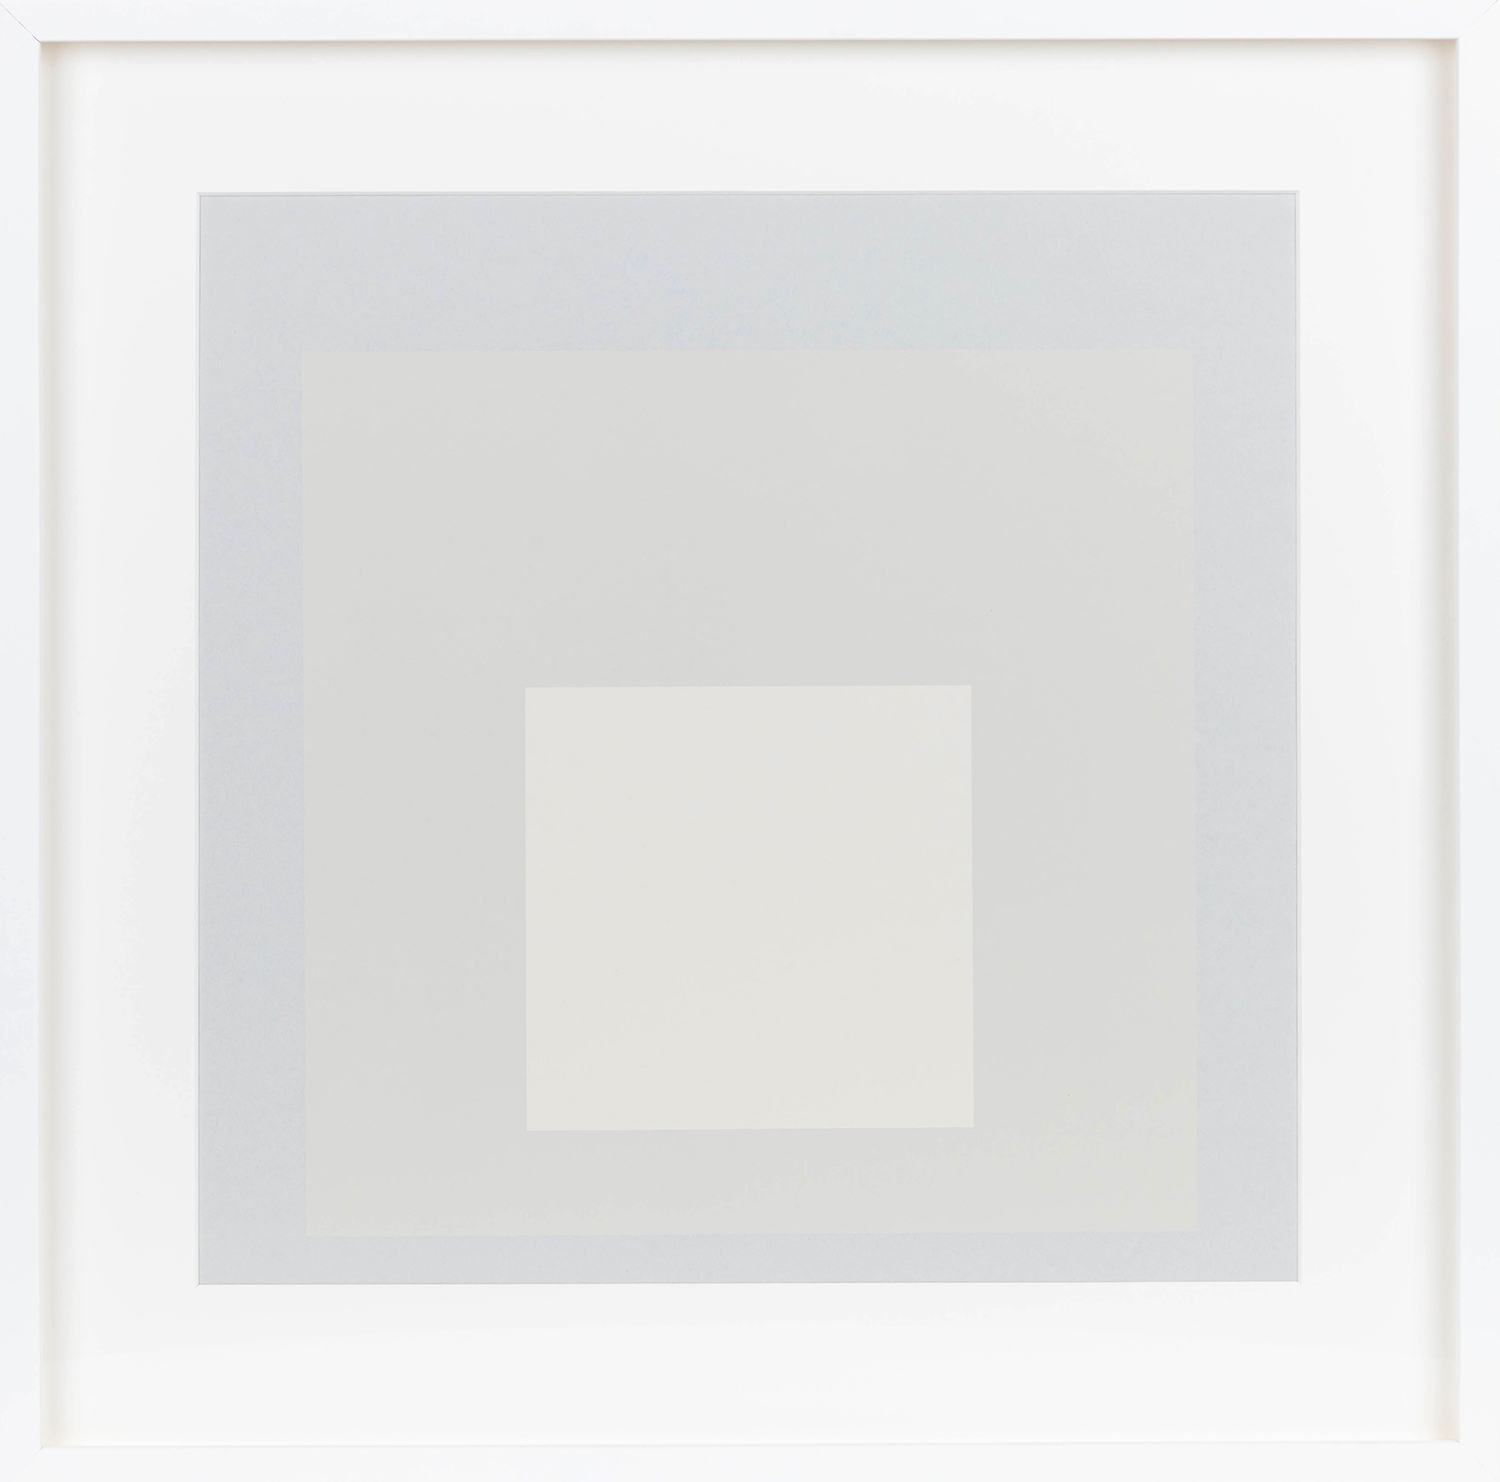 Hommage to the Square: Dimly Reflected, 1963